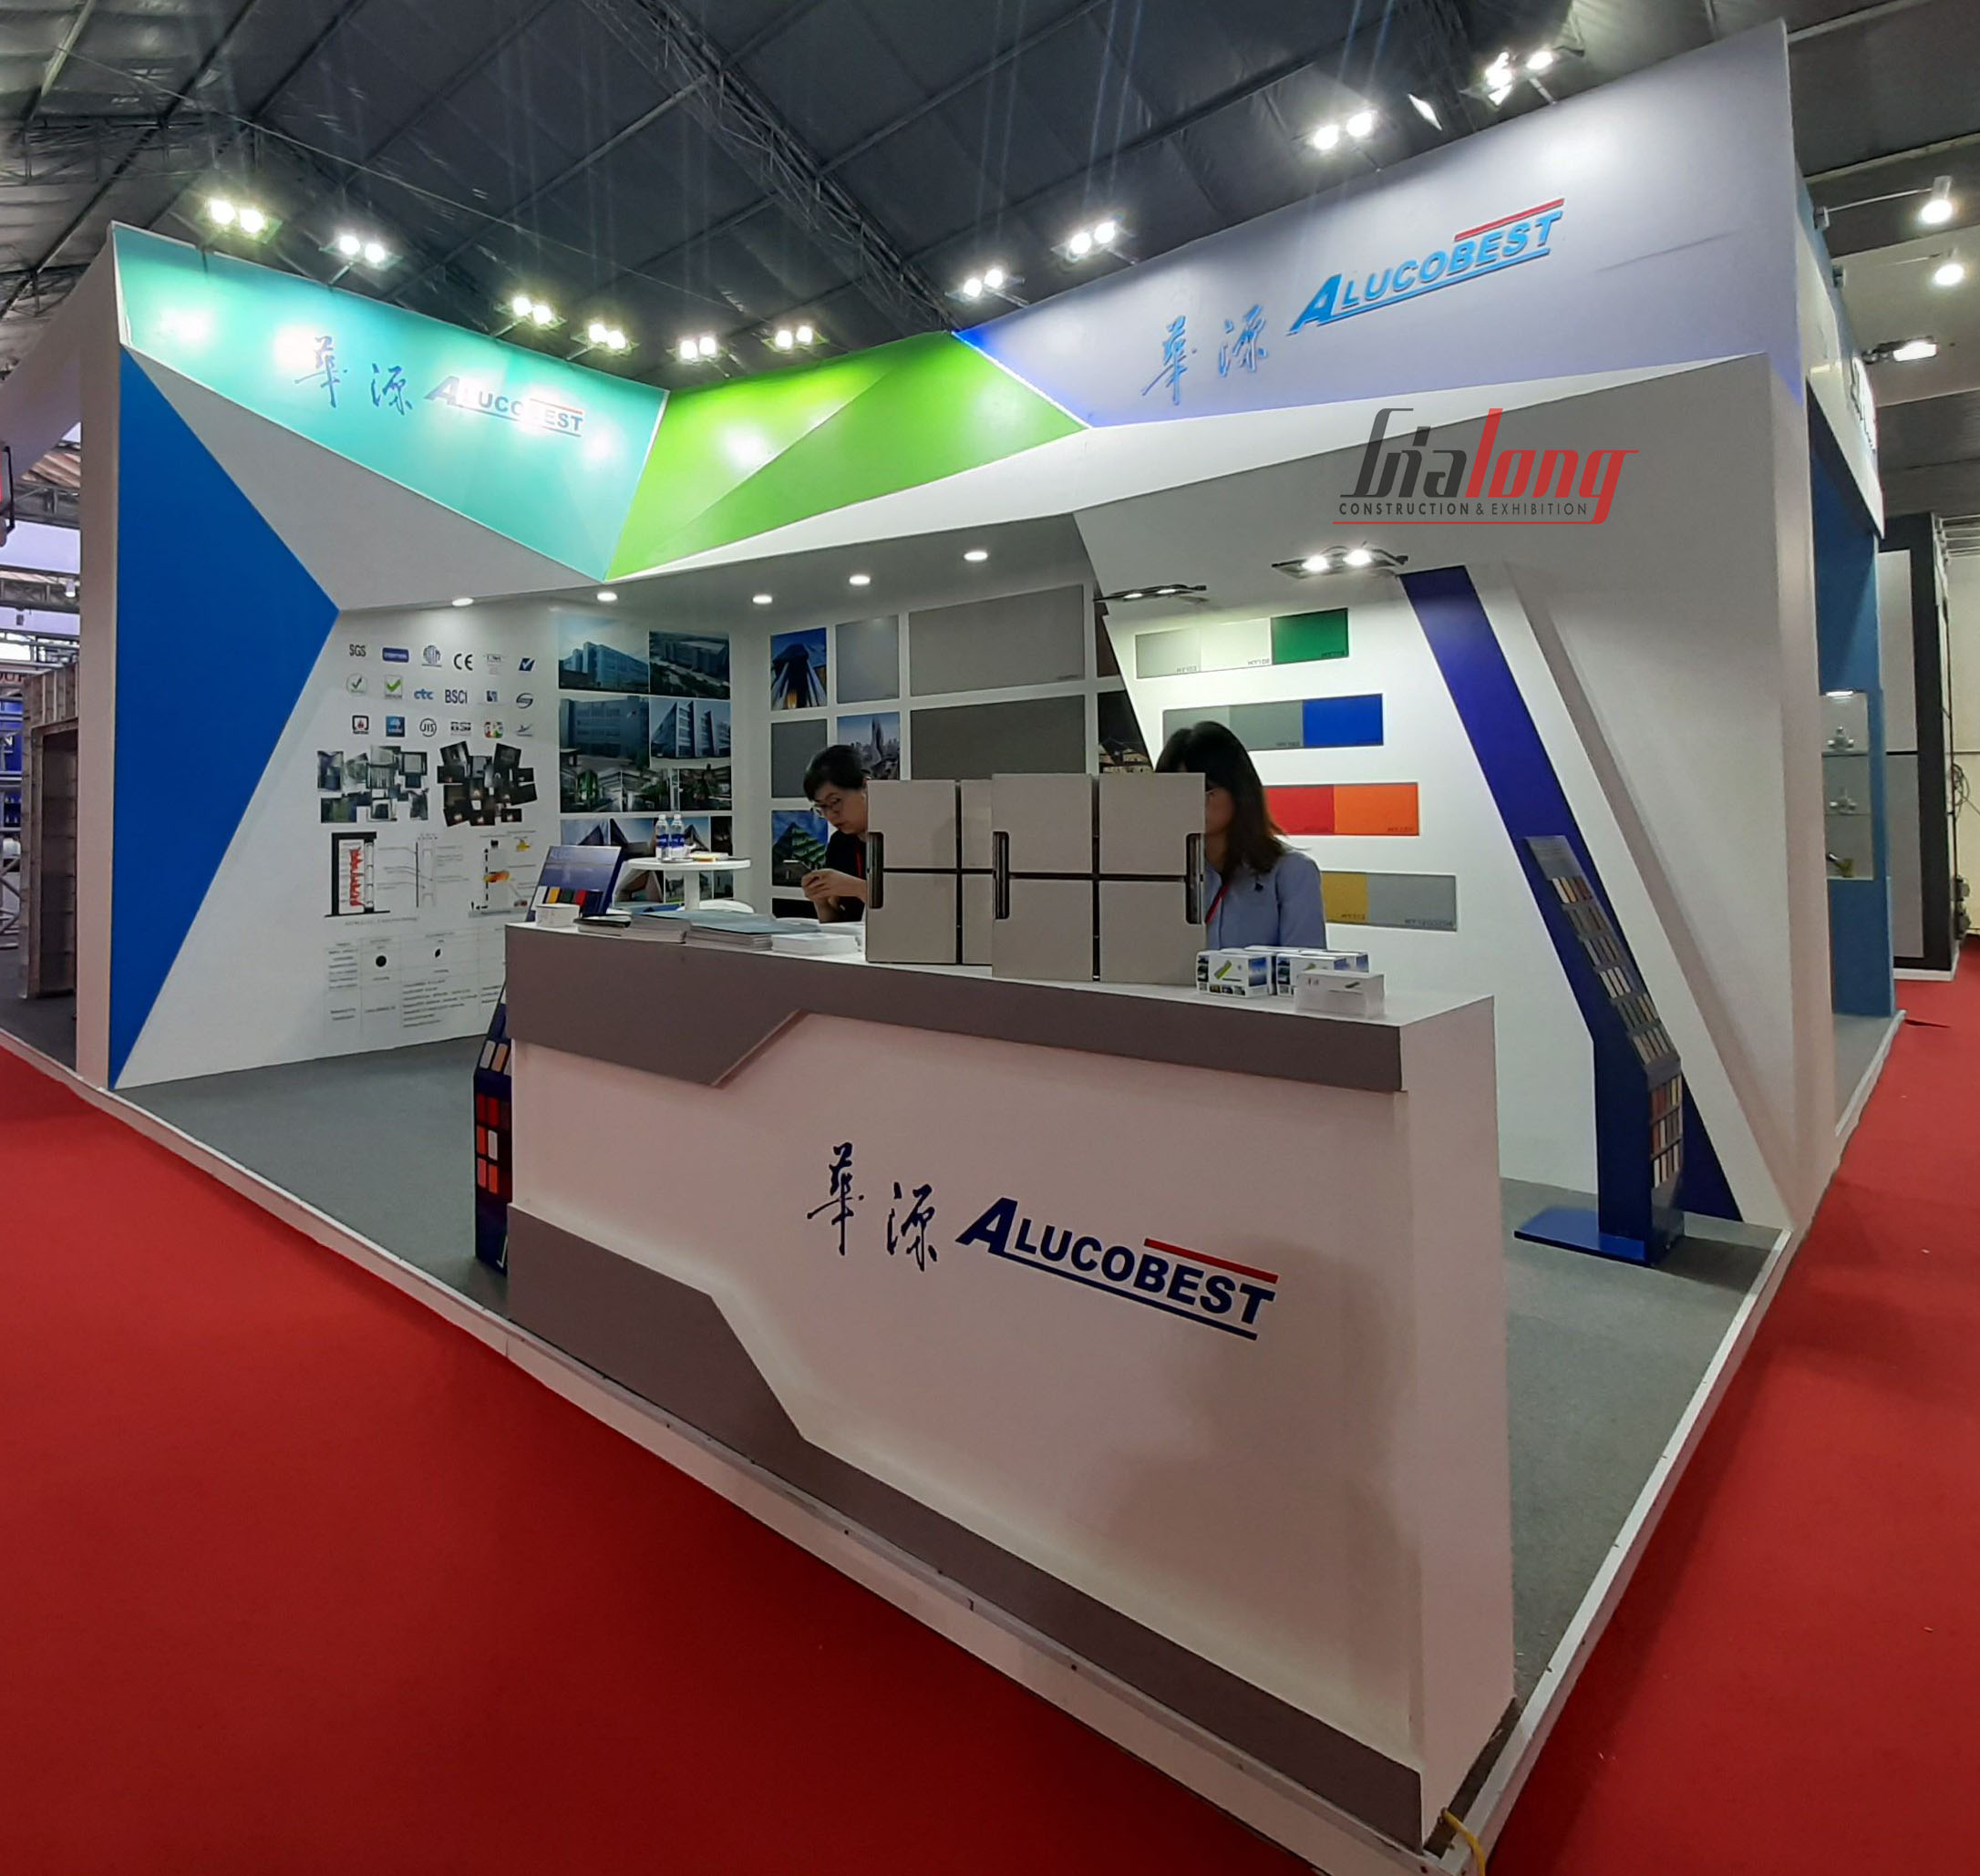 The Alucobest exhibition booth was designed and constructed by Gia Long